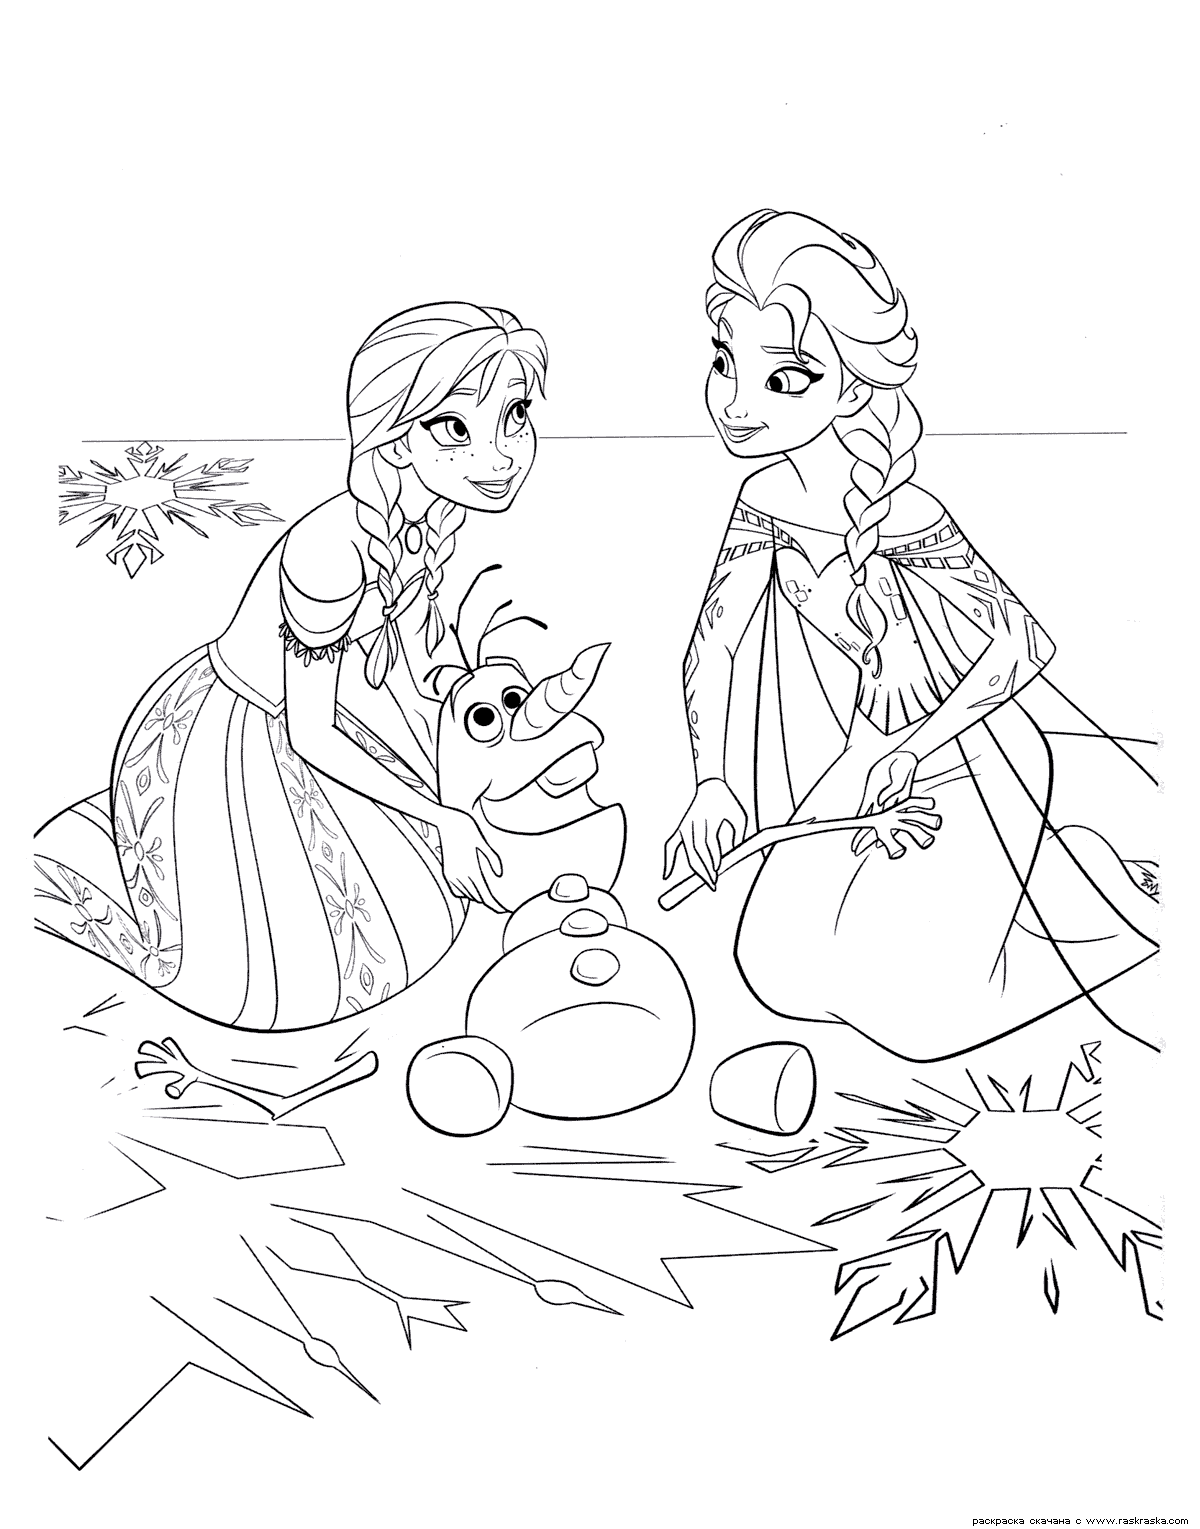 Frozen coloring pages, animated film characters: Elsa, Anna, print for free